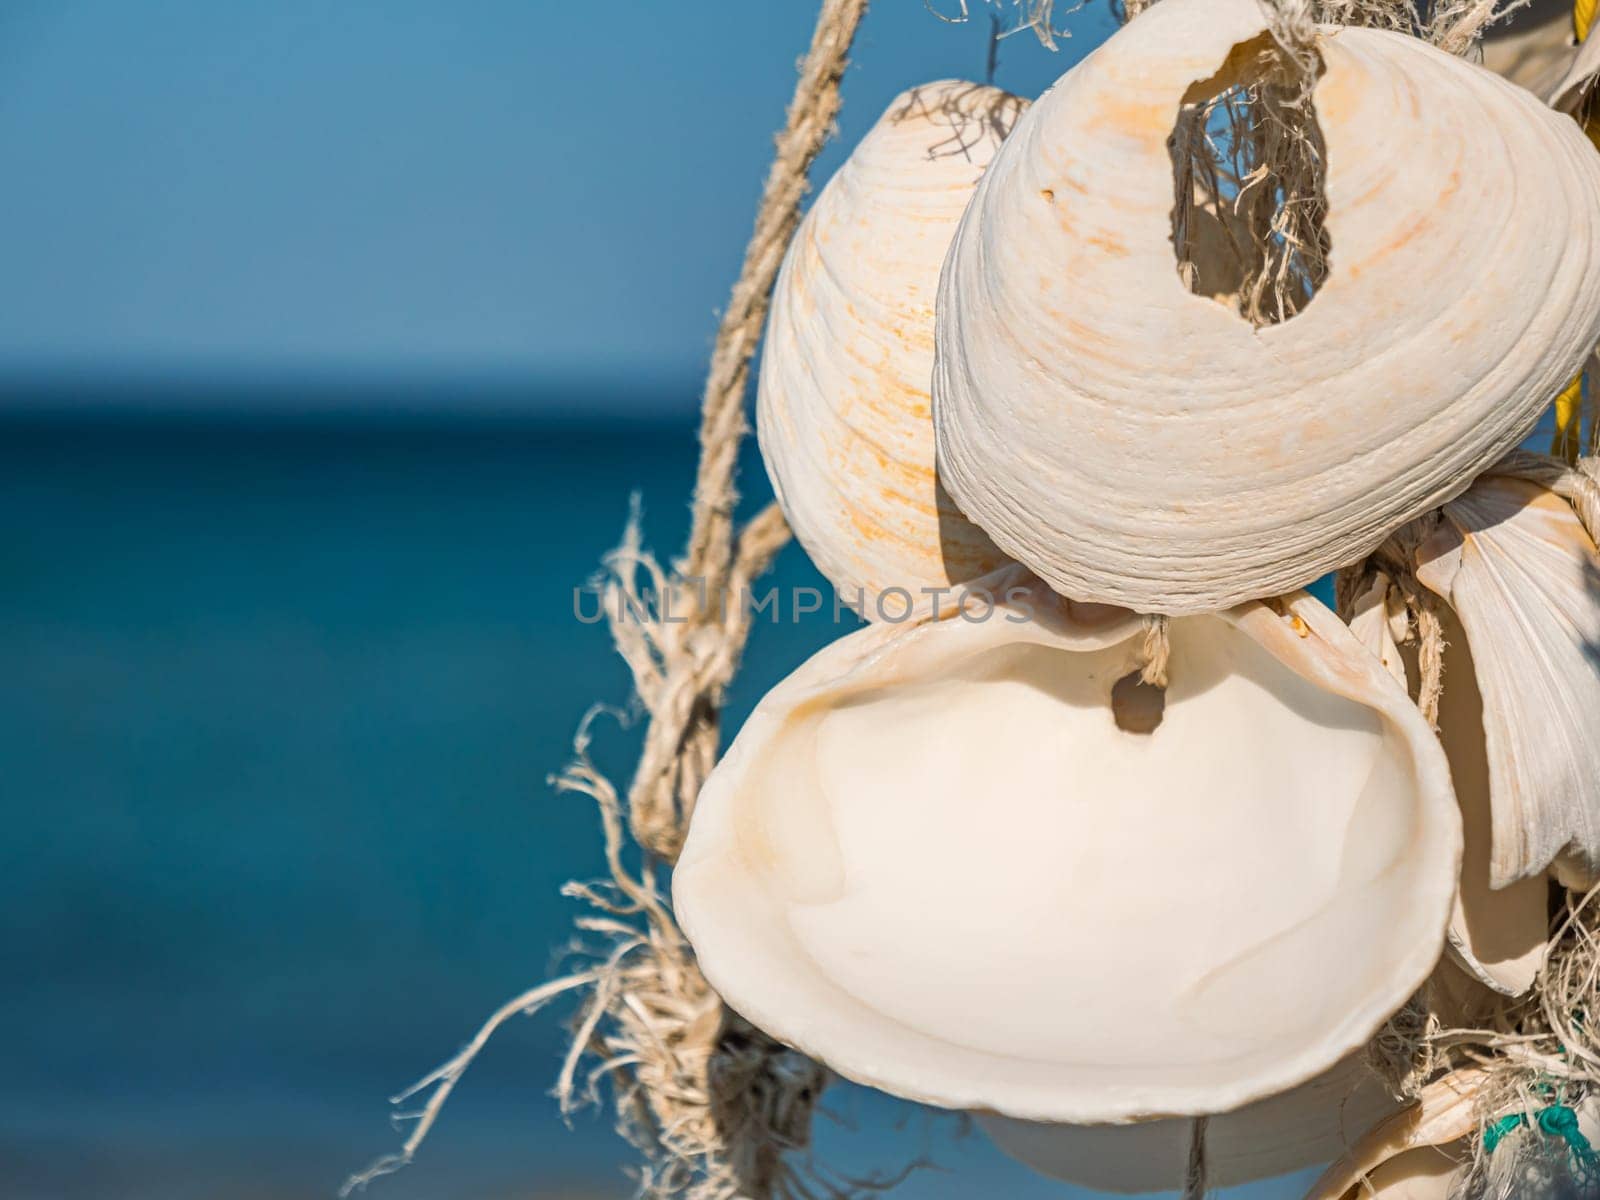 A collection of white seashells is artistically strung together and hangs by a sandy beach, with a clear blue ocean and sky in the background.